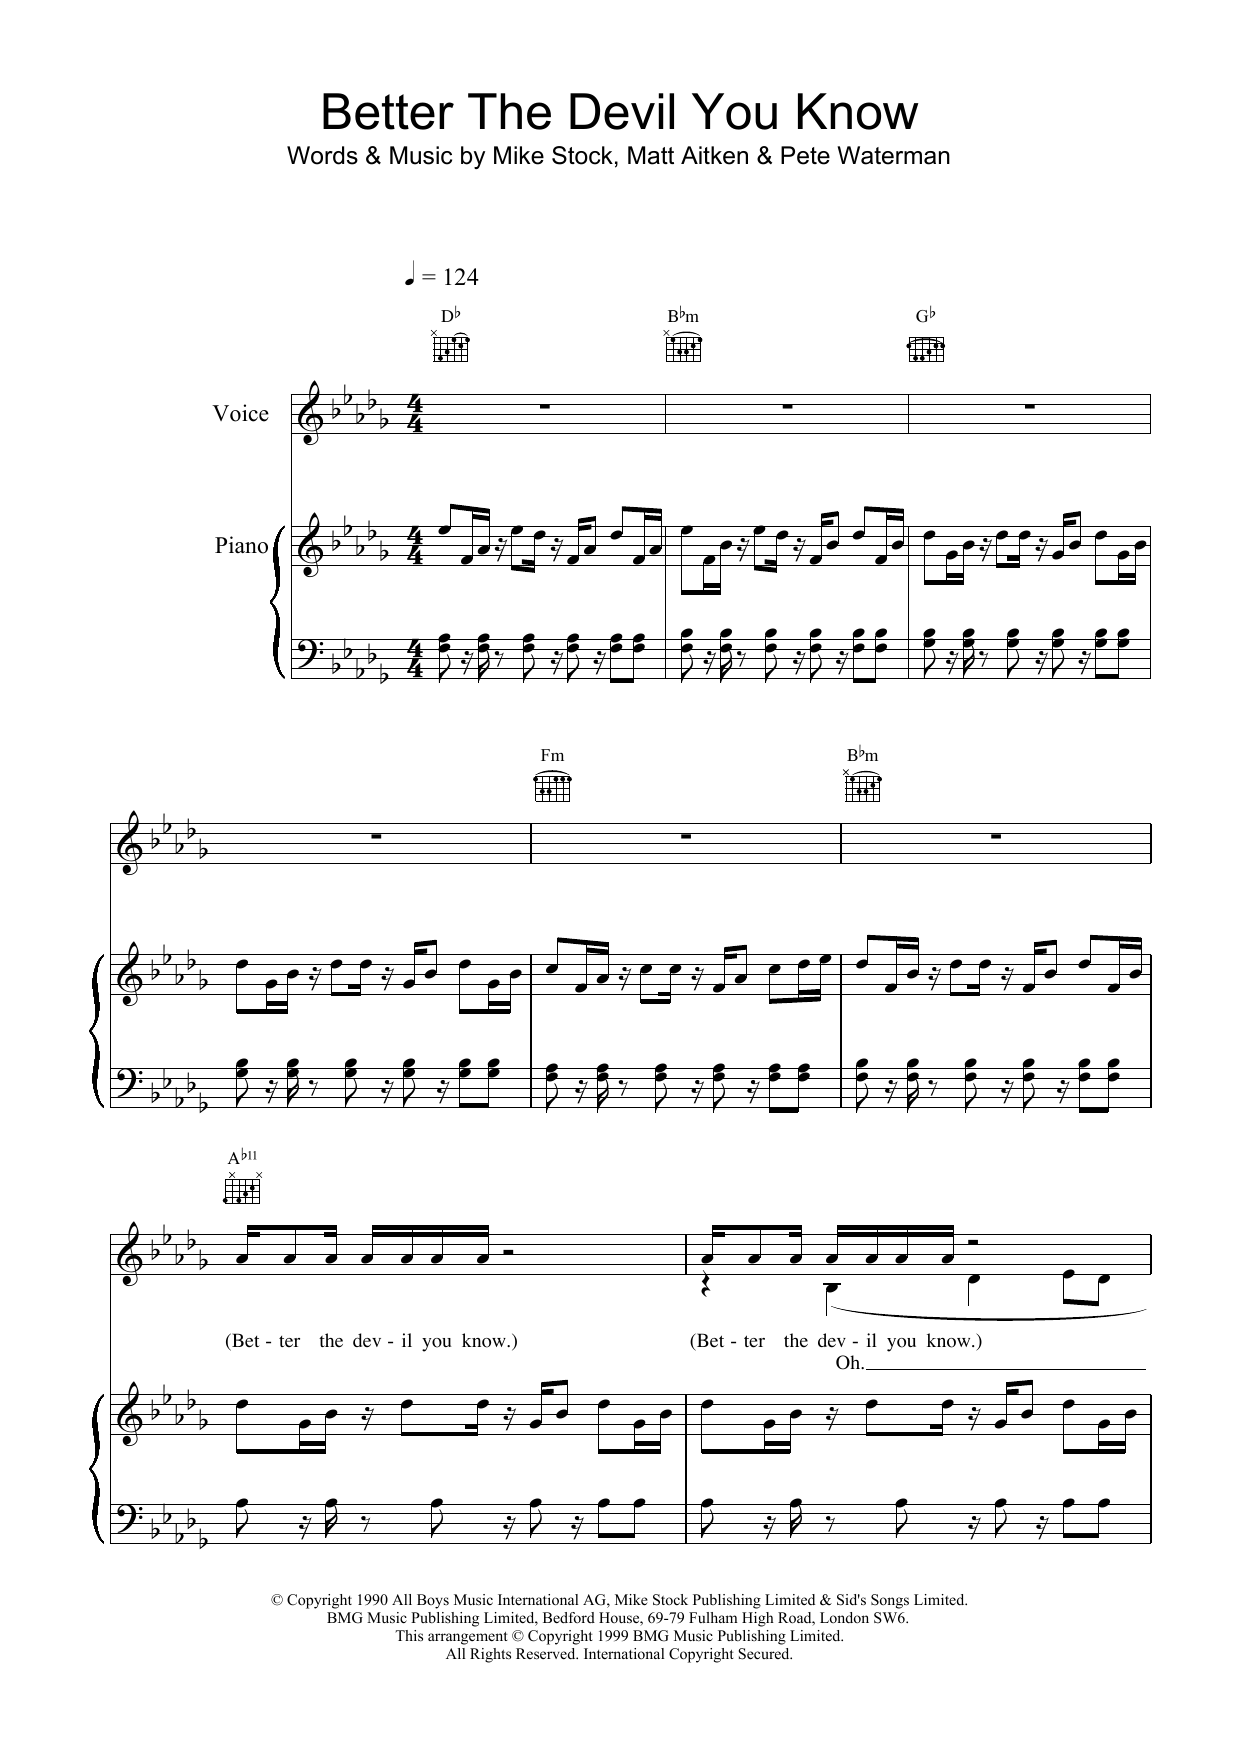 Steps Better The Devil You Know sheet music notes and chords. Download Printable PDF.